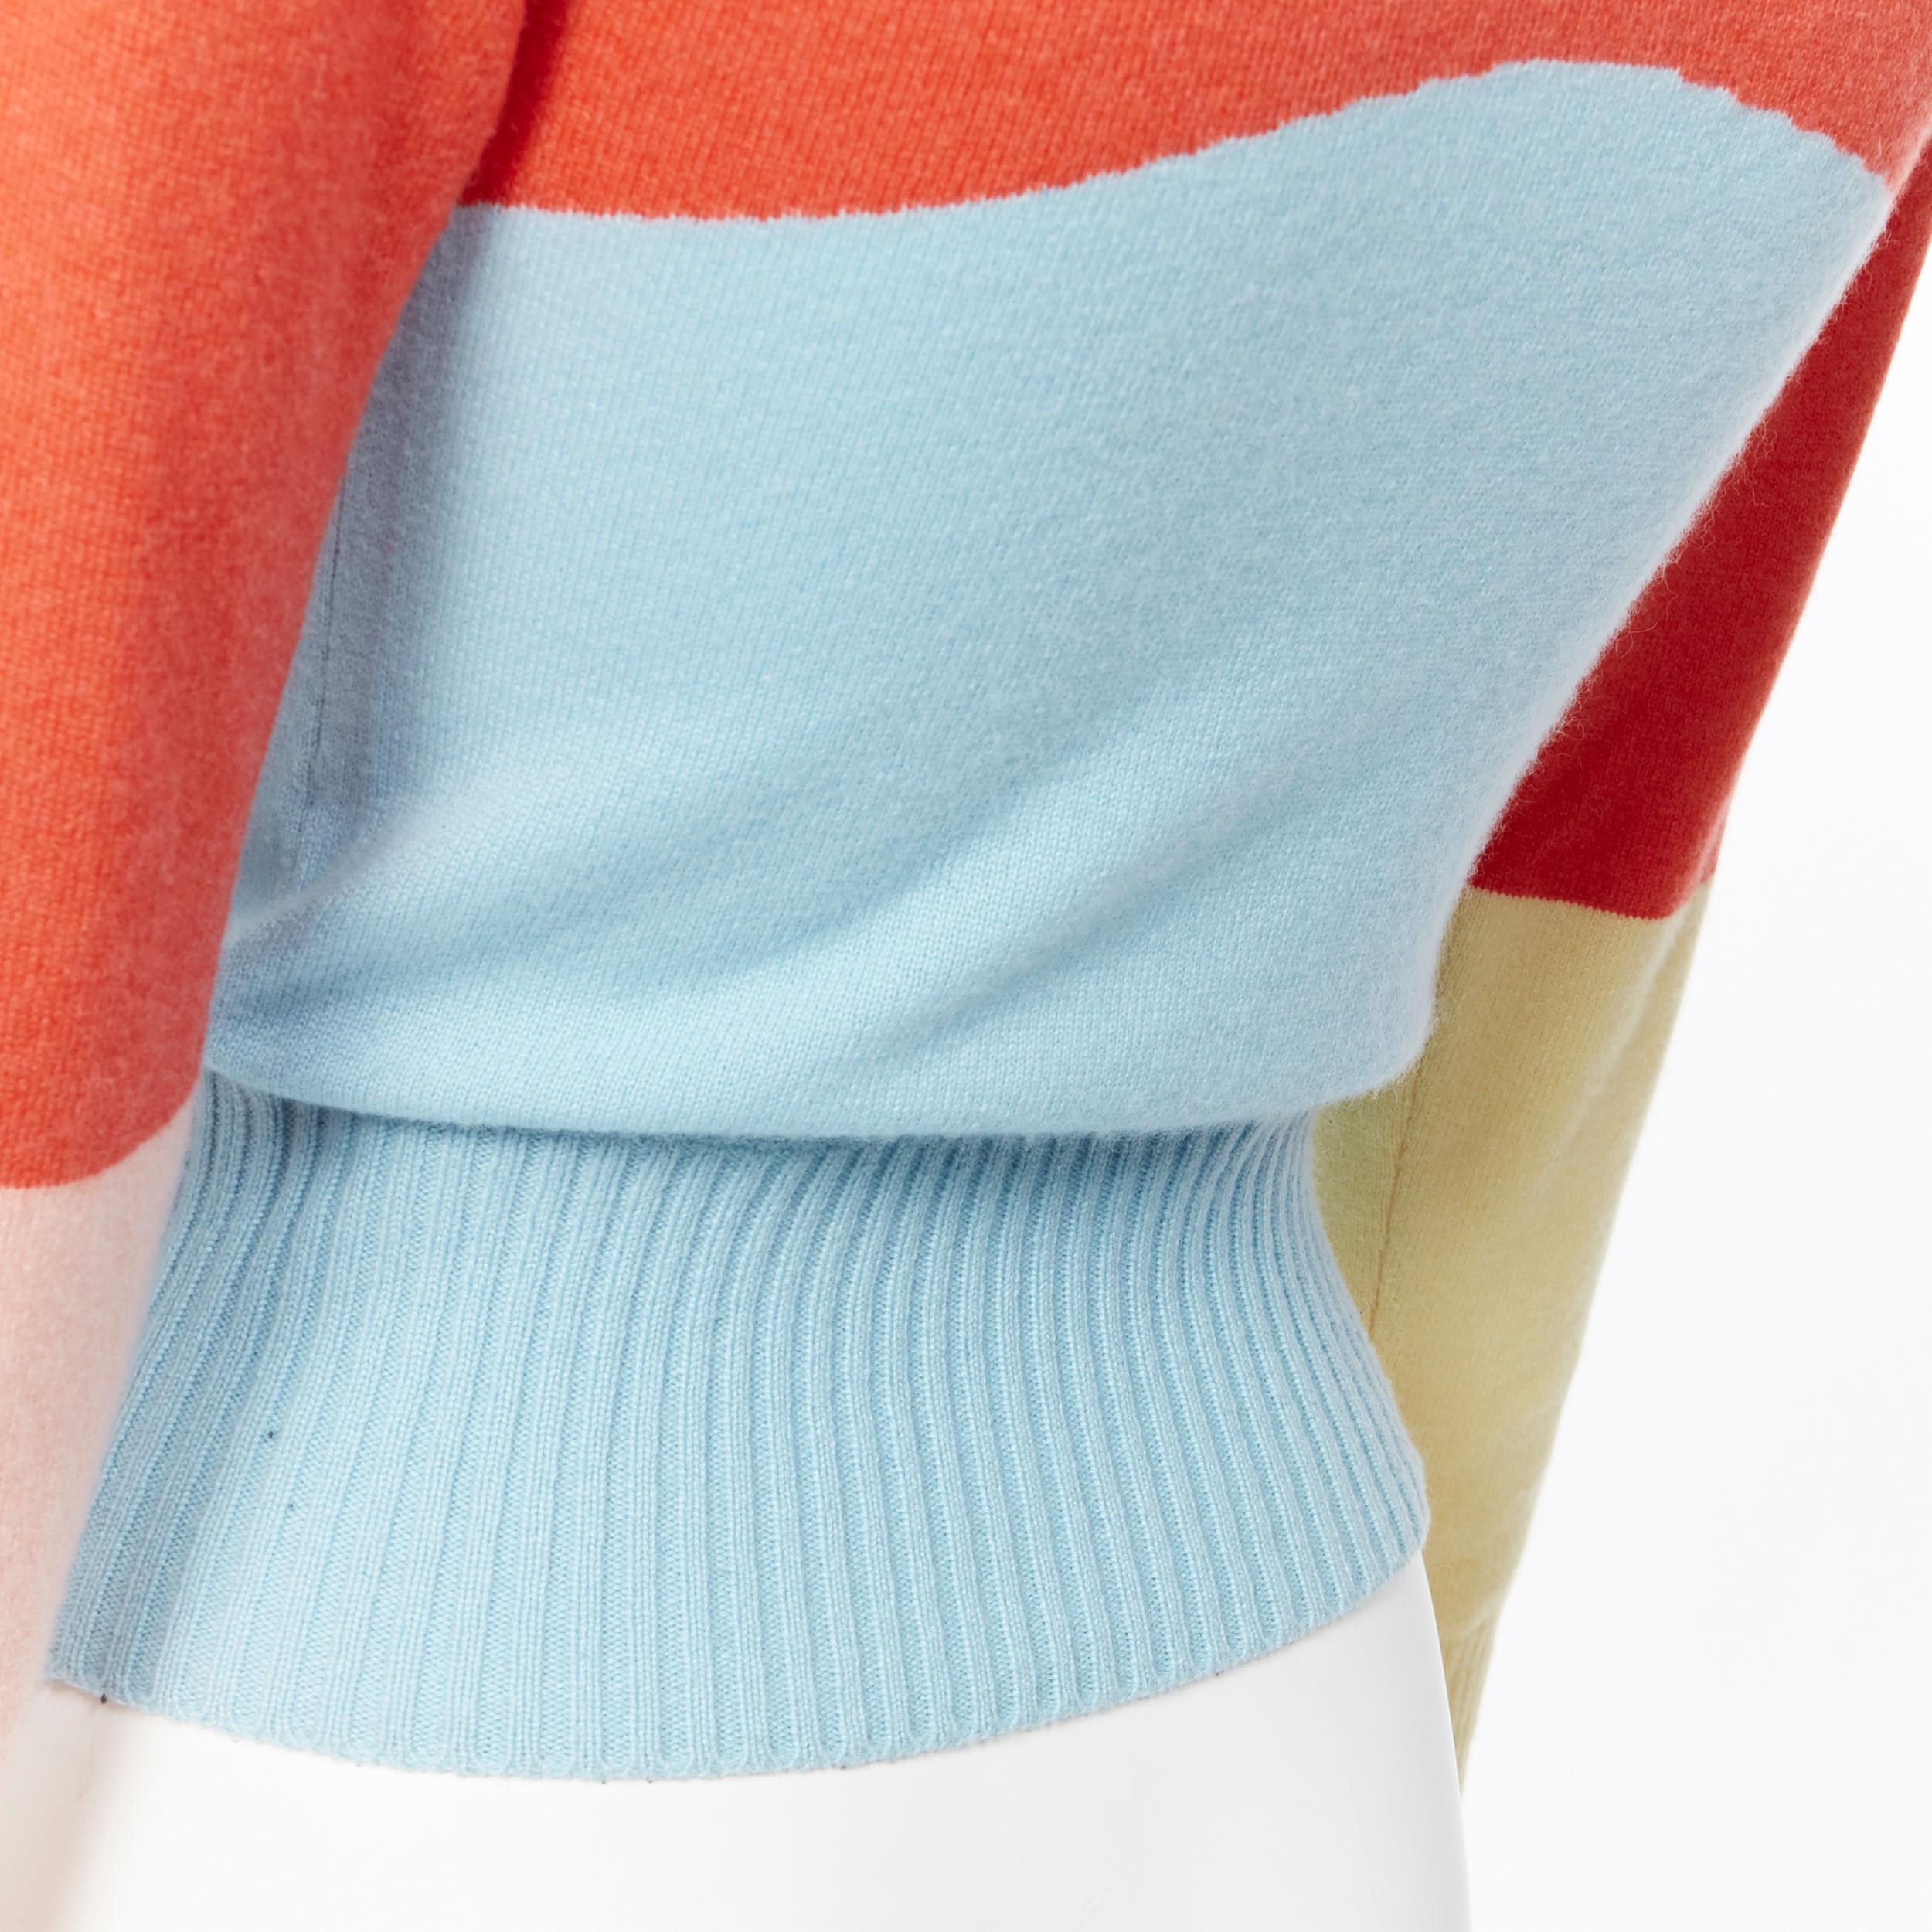 runway CHANEL 08C 100% cashmere orange colorblocked gold airplane sweater FR36 1